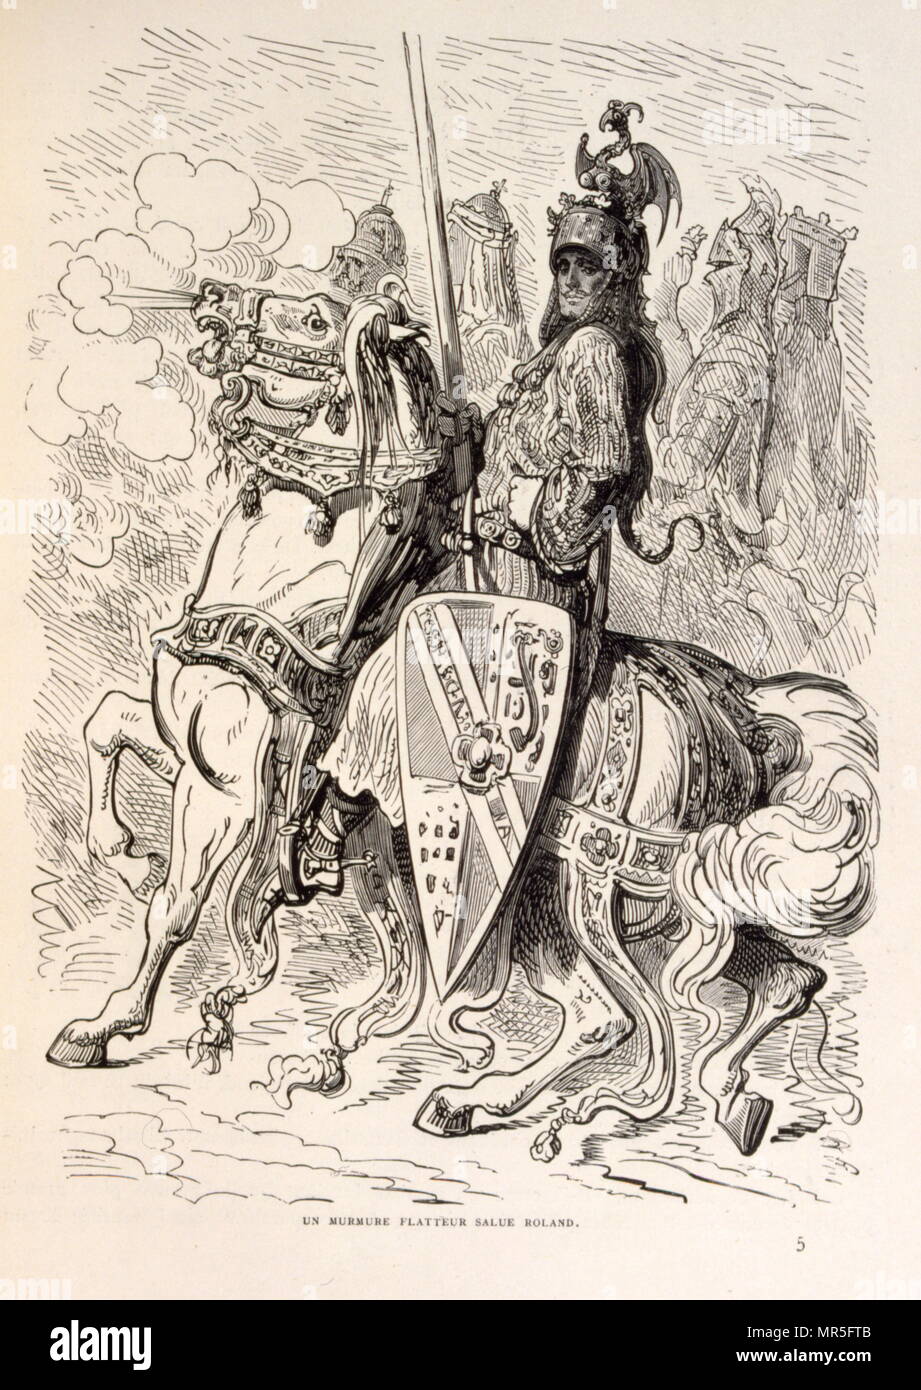 Illustration of Roland on horseback, from La legende de Croque-Mitaine; (1863); Drawn by Gustave Dore 1832-1883. The French equivalent of the Bogeyman is le Croque-Mitaine ("the mitten-biter" or rather "the hand-cruncher". A Bogeyman is a common allusion to a mythical creature in many cultures used by adults to frighten children into good behaviour. Roland ((died  778); was a Frankish military leader under Charlemagne who became one of the principal figures in the literary cycle known as the Matter of France. Stock Photo